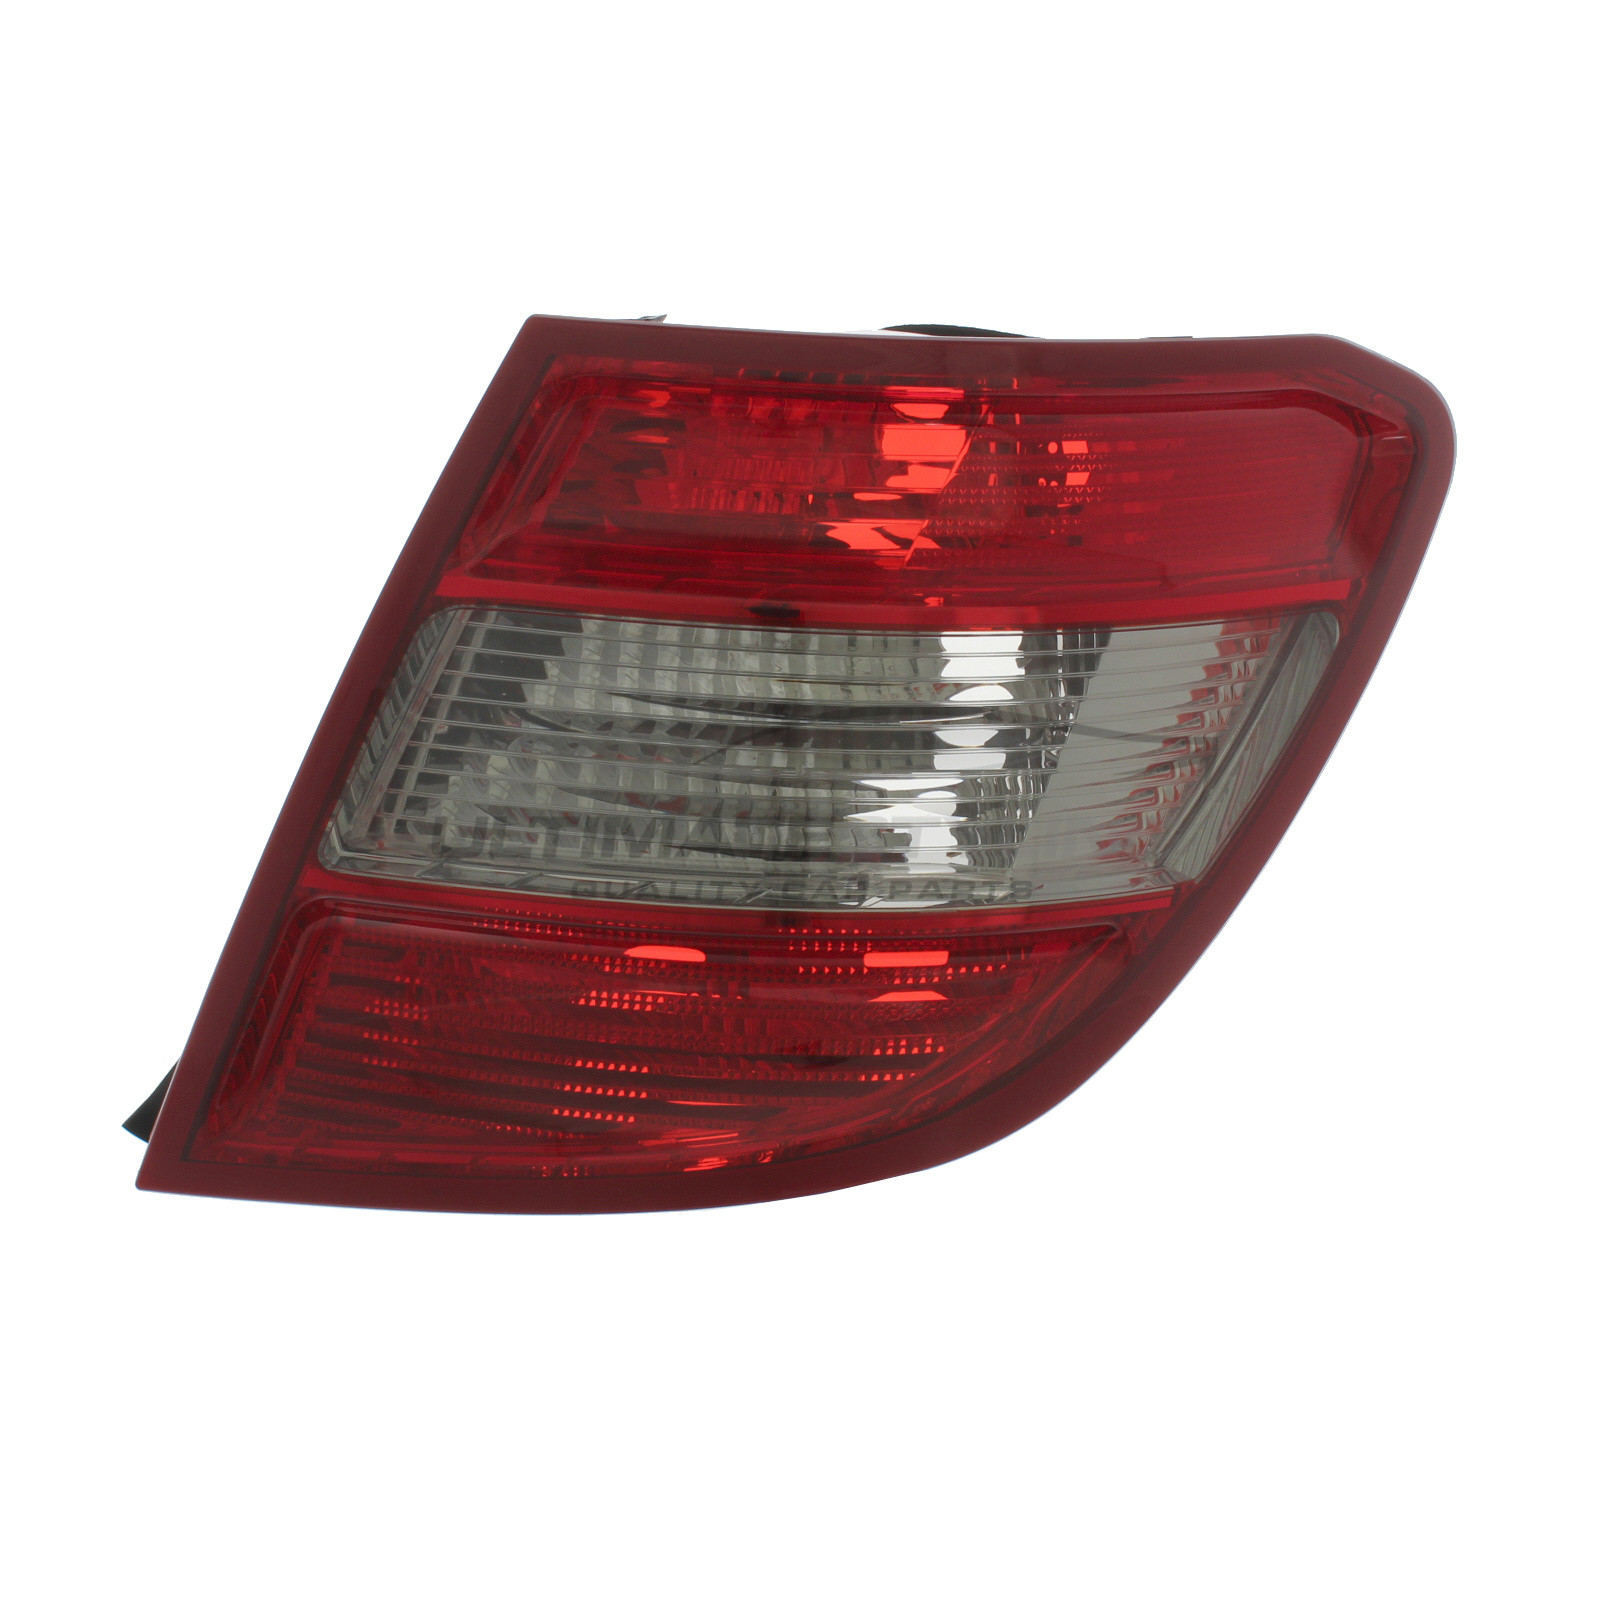 Mercedes Benz C Class 2008-2011 Non-LED with Smoked Indicator Rear Light / Tail Light Excluding Bulb Holder Drivers Side (RH)